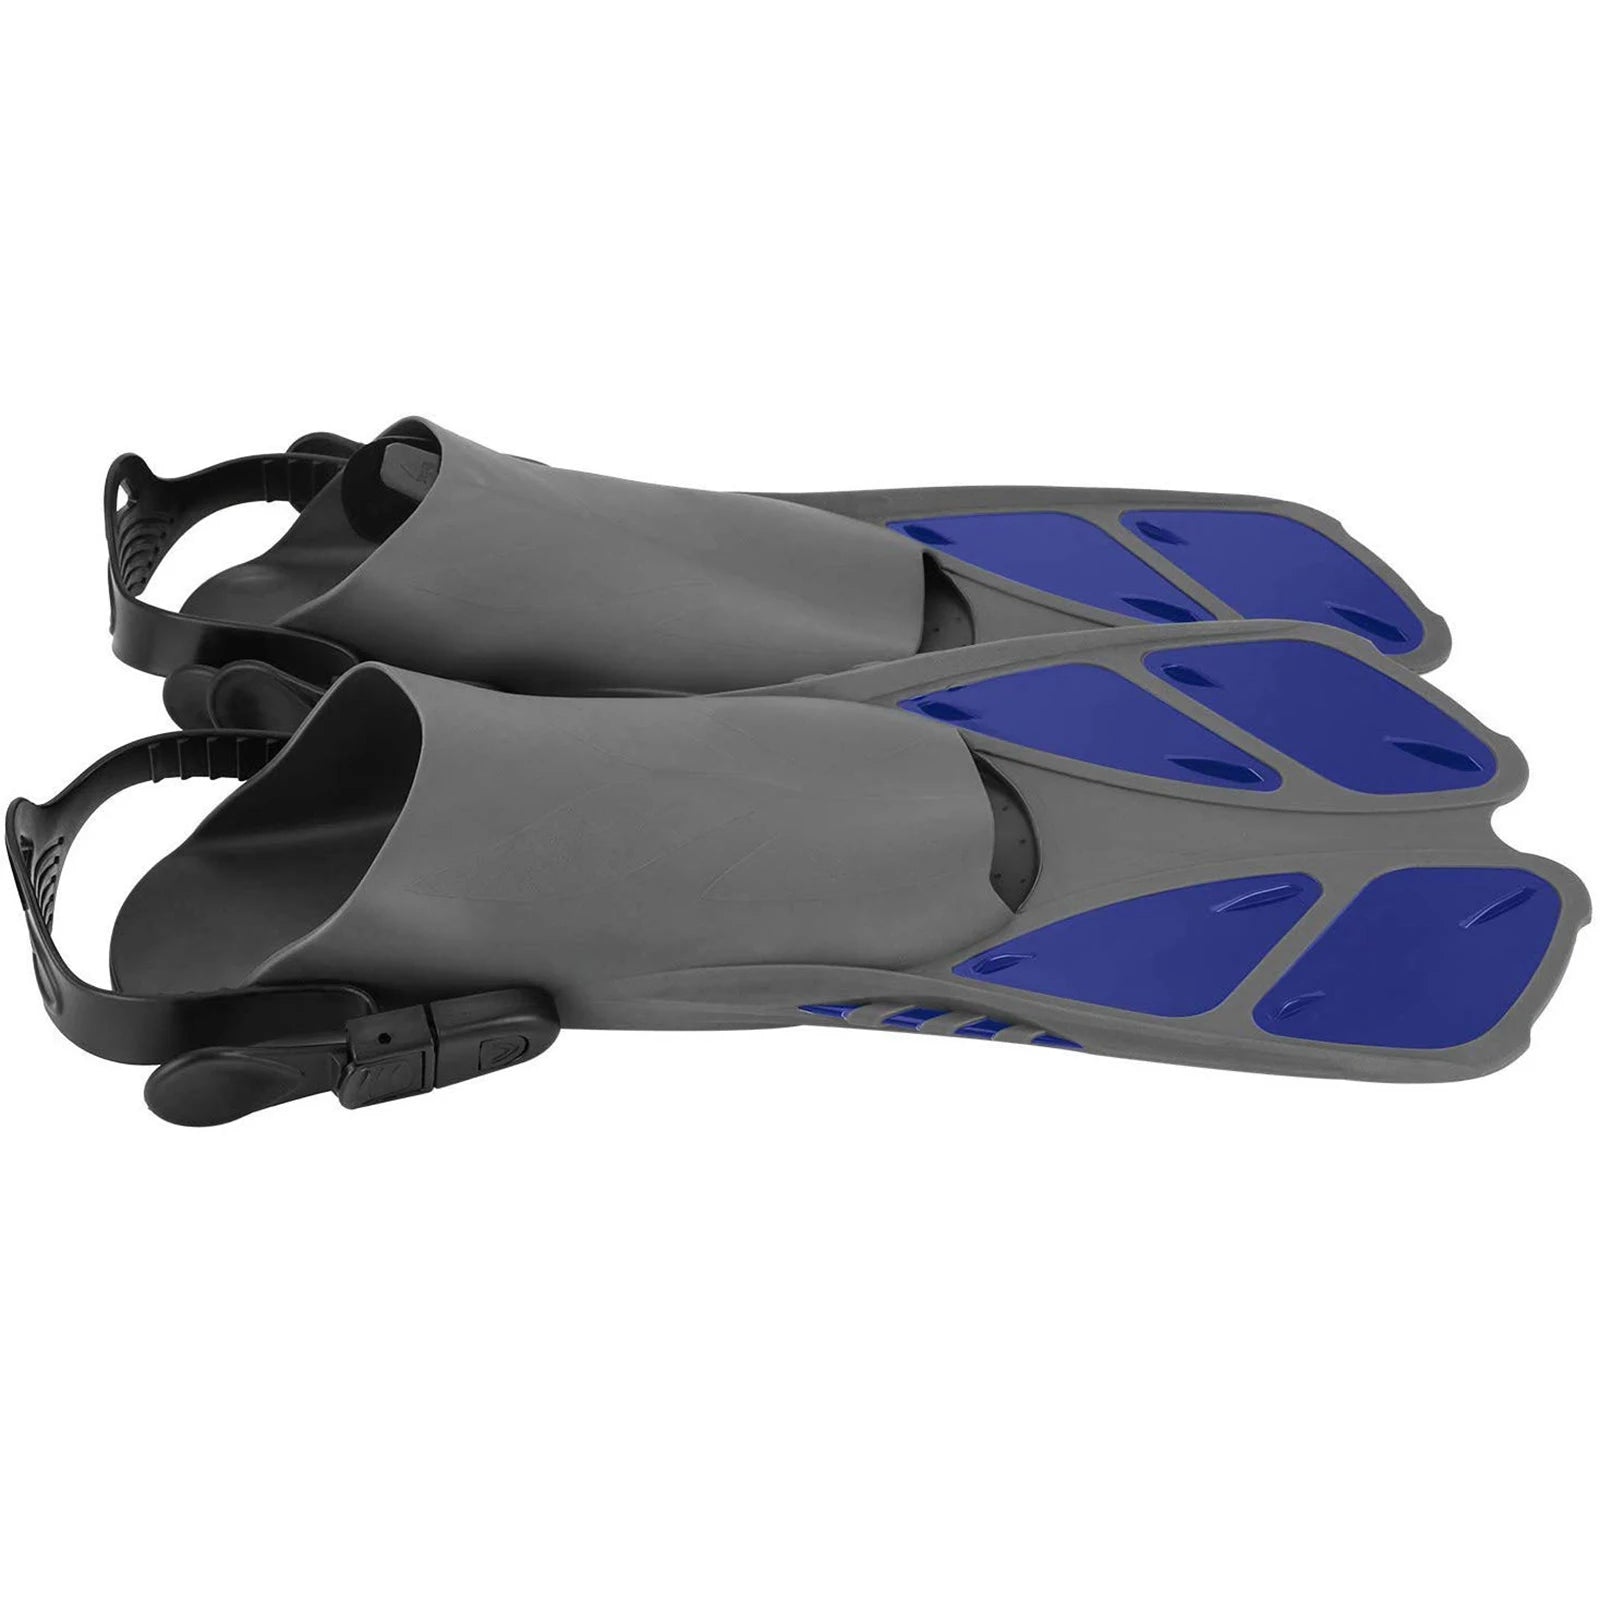 Unisex Snorkel Fin Set Adjustable Strap Diving Flippers with Mesh Bag for Snorkeling Swimming